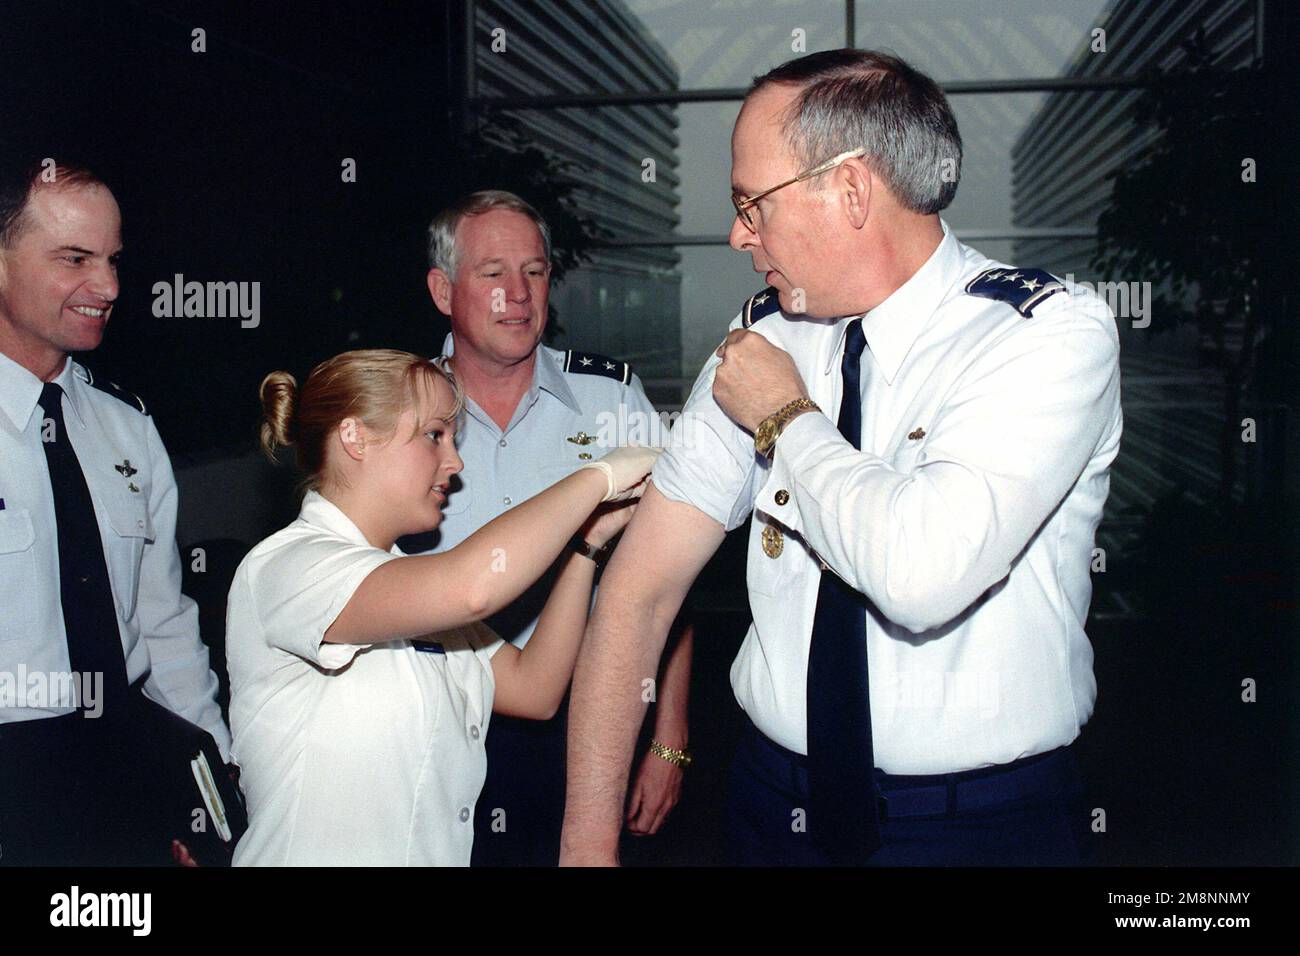 US Air Force Lieutenant General Lance W. Lord (Right), Vice Commander, Air Force Space Command, Peterson Air Force Base, Colorado, receives a flu shot while USAF Major General William R. Looney III (Center), Commander, Space Warfare Center, Schriever AFB, CO, looks on at Peterson AFB, CO, on April 29th, 1999. Base: Peterson Air Force Base State: Colorado (CO) Country: United States Of America (USA) Stock Photo